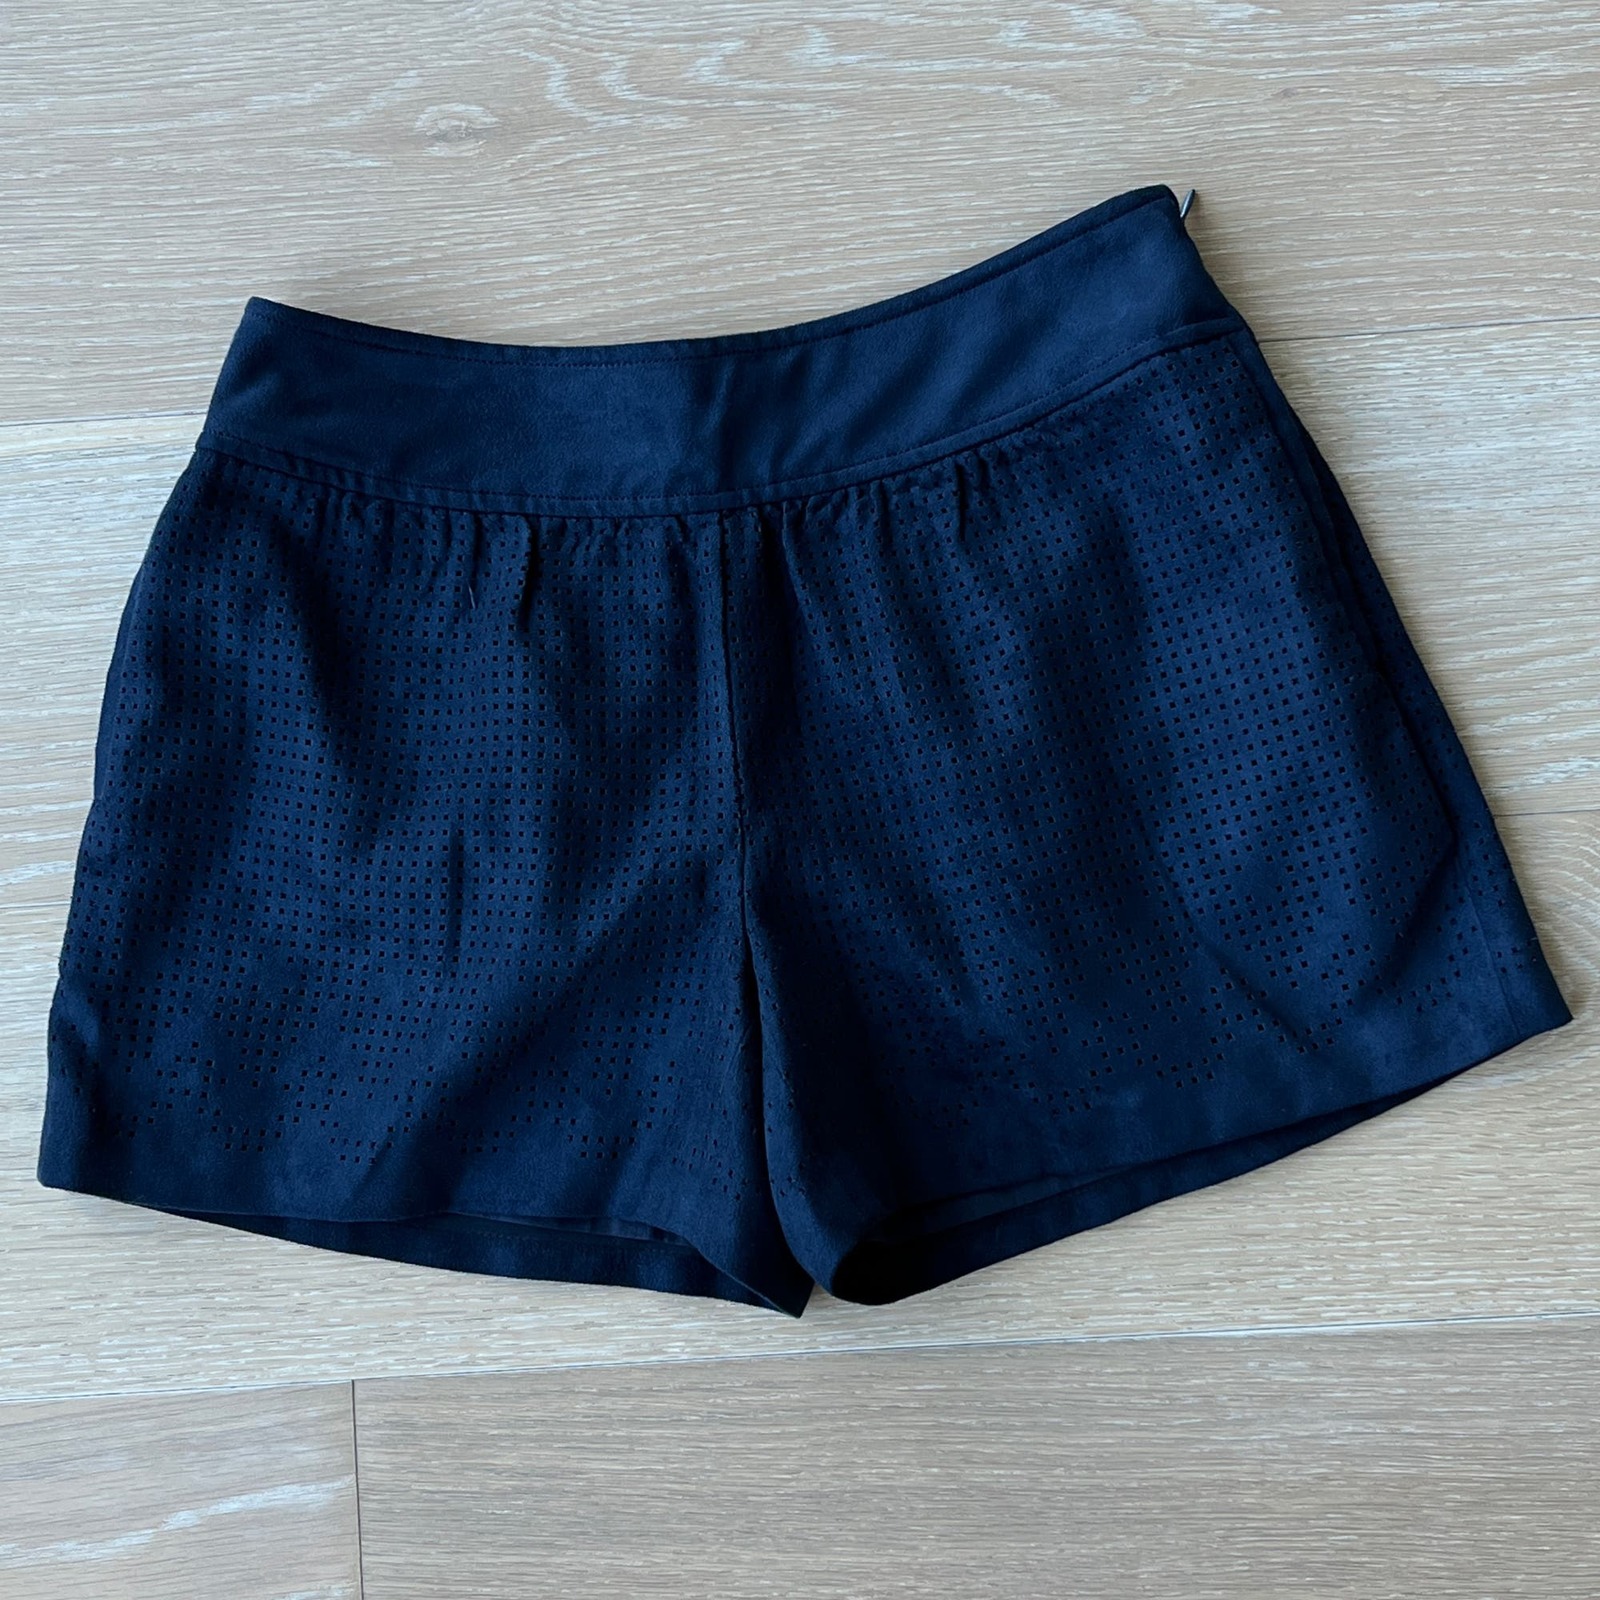 Primary image for Anthropologie Elevenses Vegan Suede Cutwork Shorts sz 0 Petite NEW